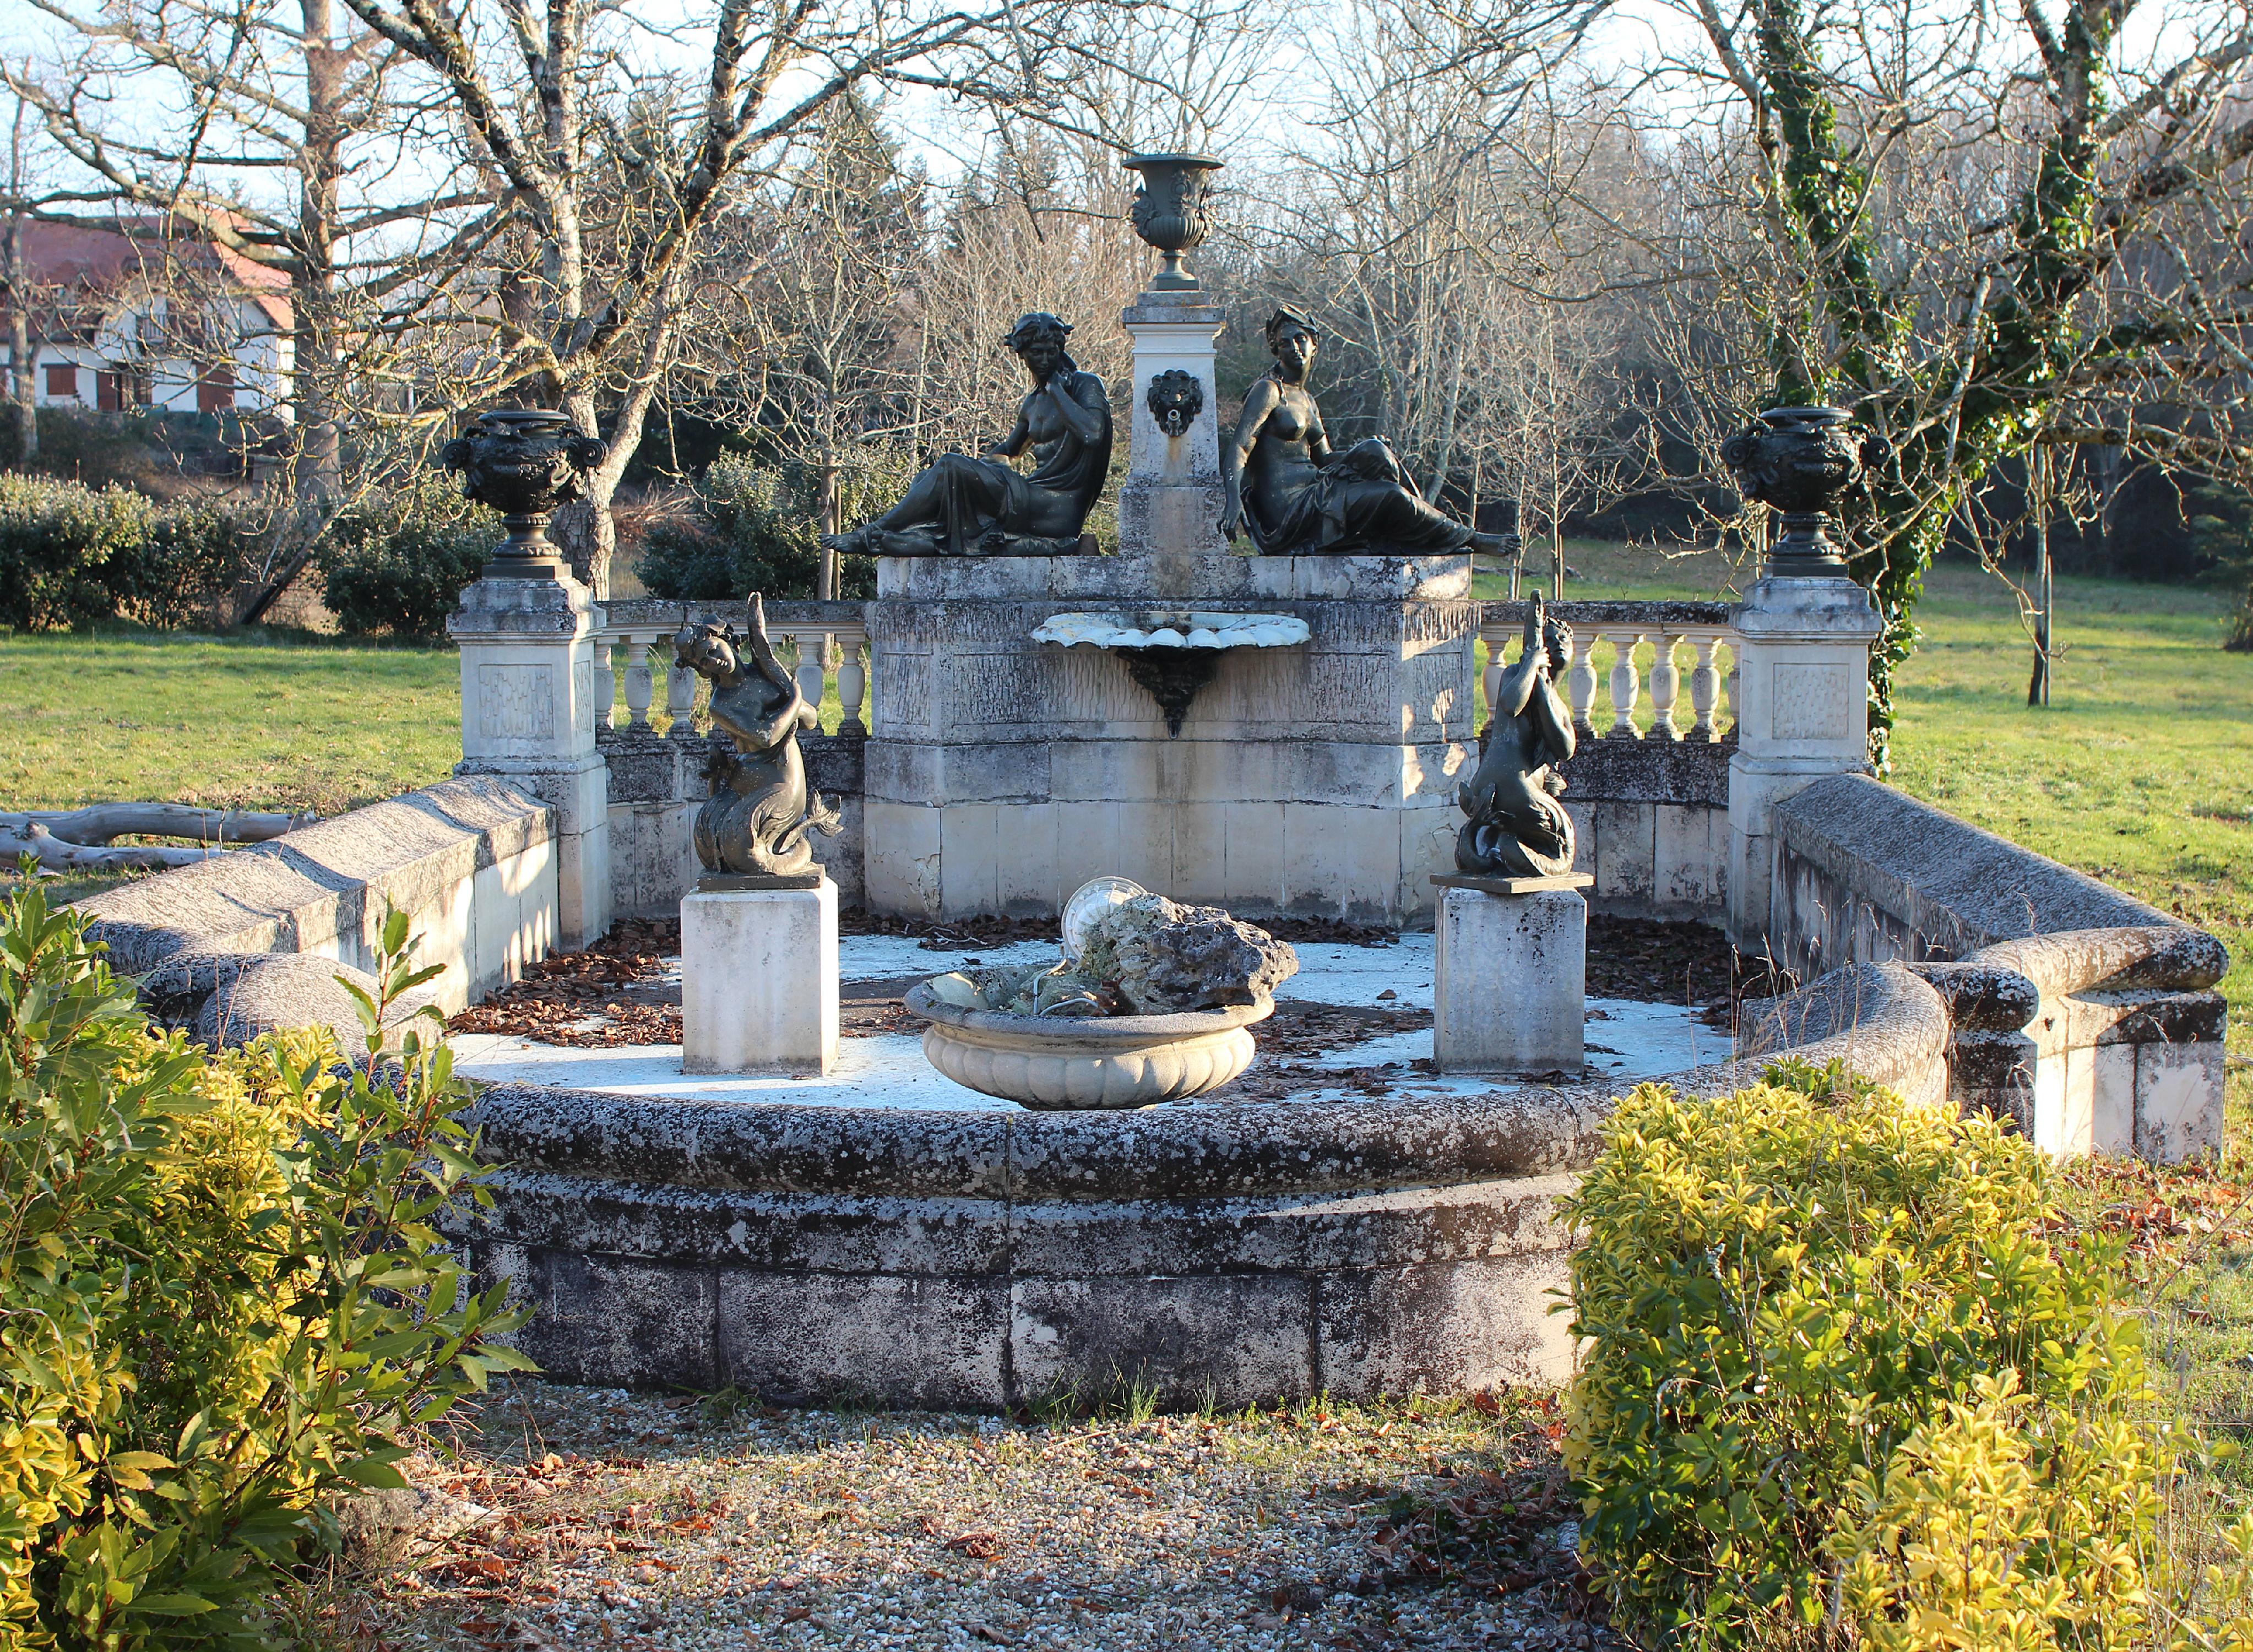 The cast iron statues of this exceptional fountain bear the signature of the famous Val d'Osne foundry. The fountain was created around 1870-1880 to decorate the park of the Chateau du Pian of Bouliac, near Bordeaux.
The group of the two back to